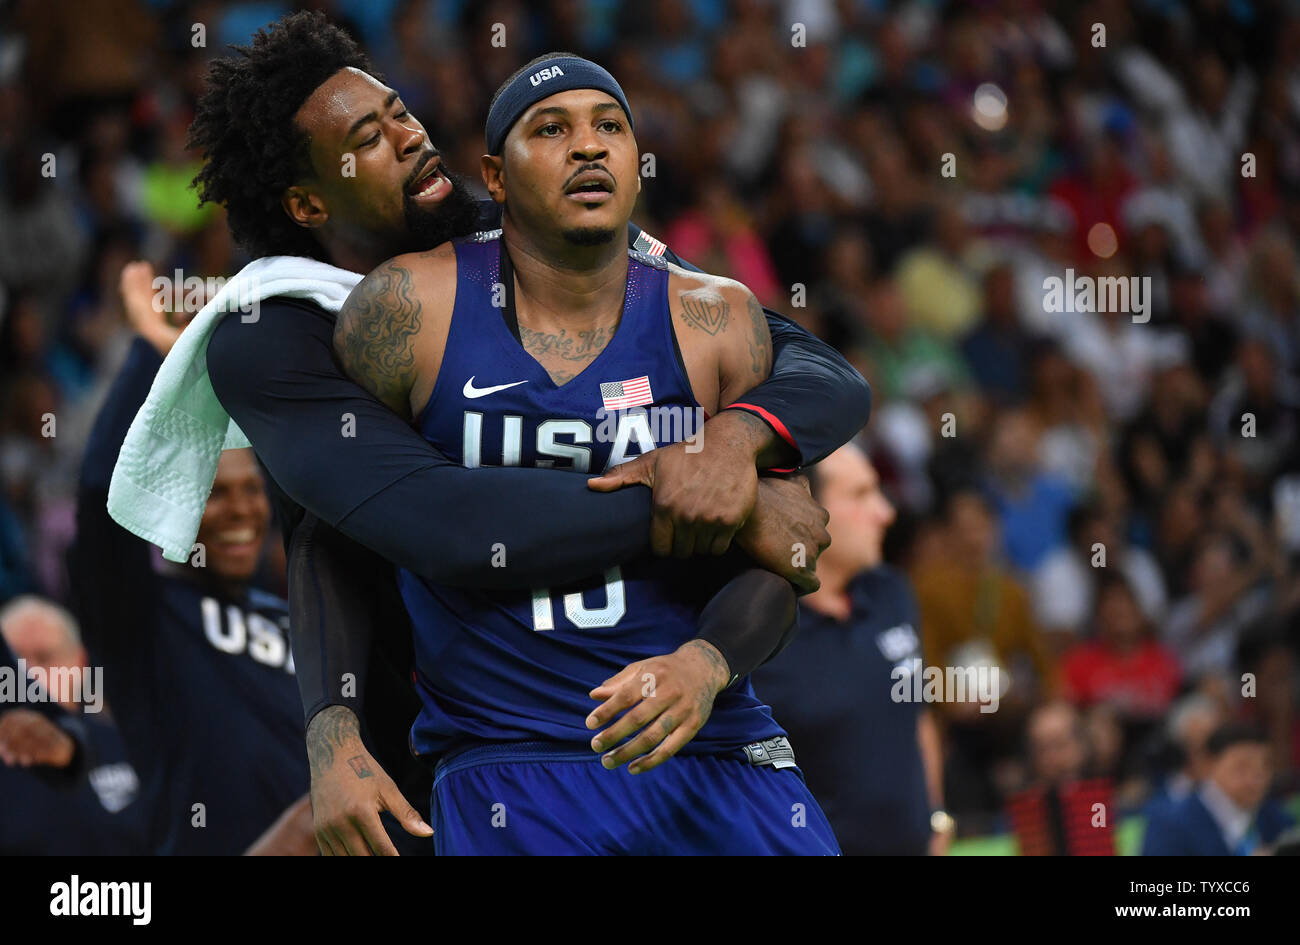 DeAndre Jordan hugs Carmelo Anthony of the United States after Kevin Durant makes a 3-point shot in the first half against Serbia in the Men's Basketball gold medal game between Serbia and the United States at Carioca Arena 1 at the 2016 Rio Summer Olympics in Rio de Janeiro, Brazil, on August 21, 2016.   Photo by Kevin Dietsch/UPI Stock Photo